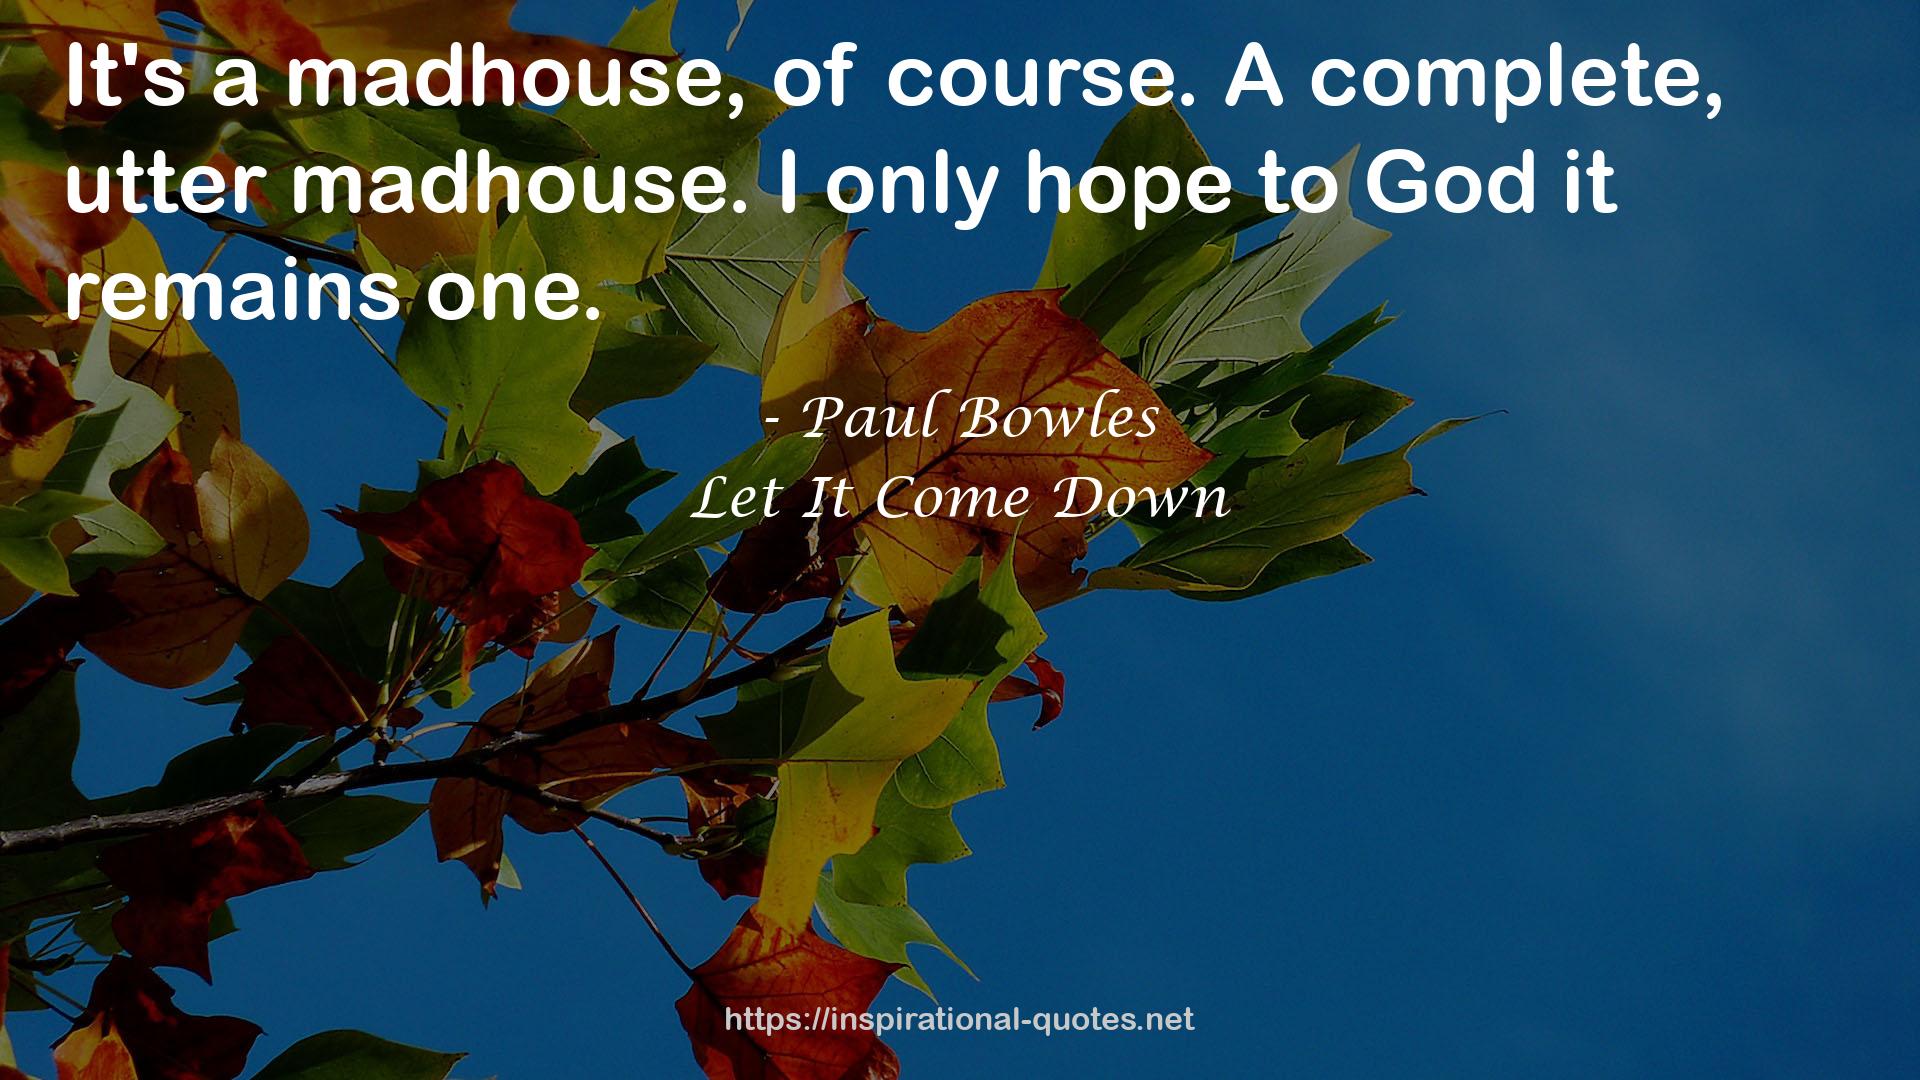 Paul Bowles QUOTES